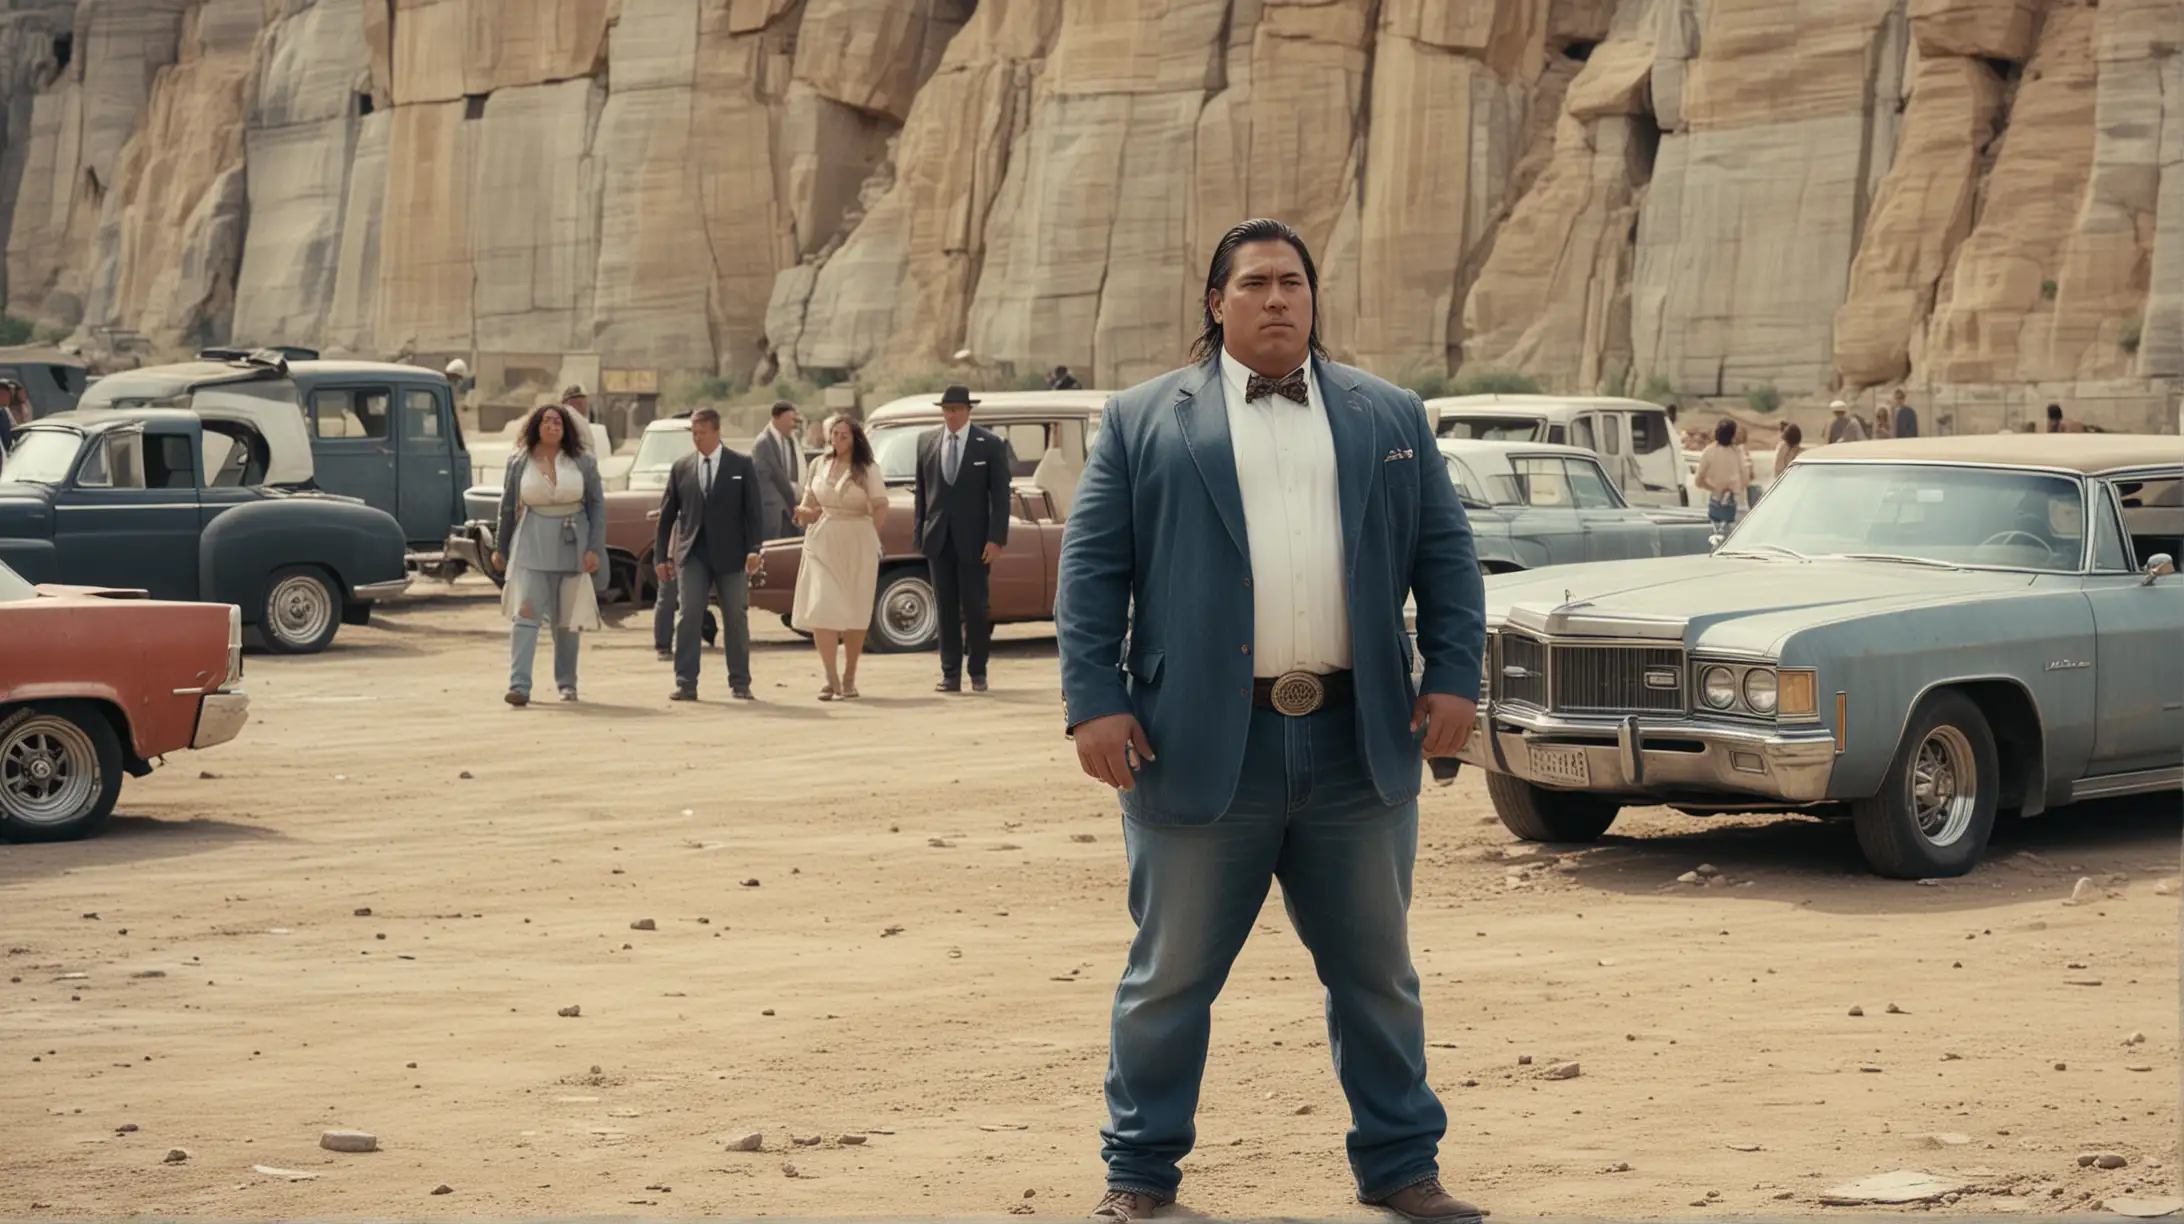 Group of People, men in suits, fat woman in dress, muscular native American, old cowboy in dusty jeans, standing in abandoned quarry, facing each, modern cars parked in background, midday light, photo realistic, cinematic low angle, 35mm film, wide angle lens